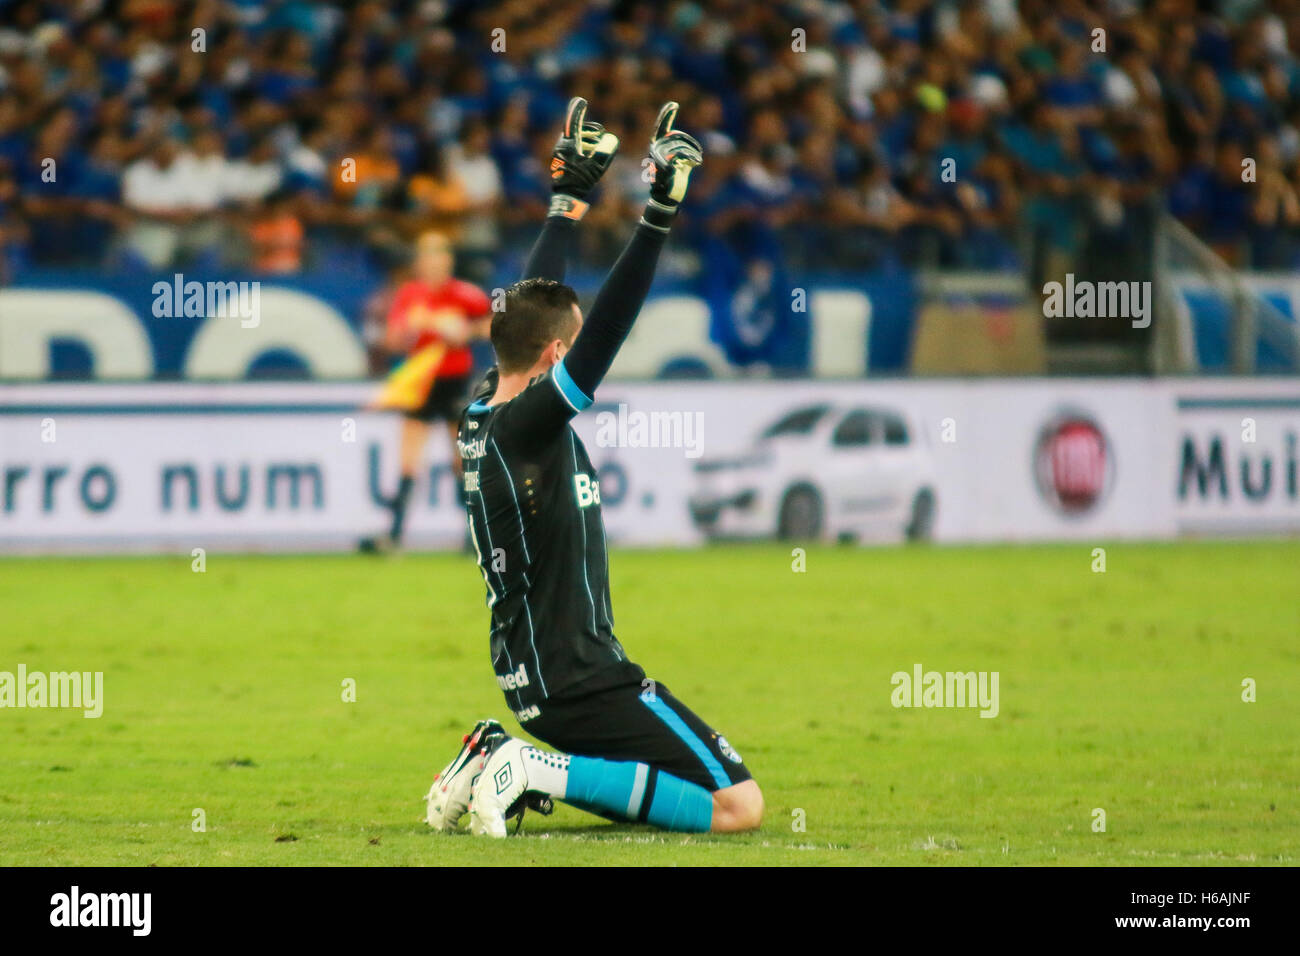 Belo Horizonte, Brazil. 26th Oct, 2016. Marcelo Grohe celebrates the country&#3first SoroSorority goal for Cruzeiro x Gremio match valid for the semifinals of Brazil Cup, played at the Ese Estadio Mineirao, Belo Horizonte, MG. Credit:  Dudu Macedo/FotoArena/Alamy Live News Stock Photo